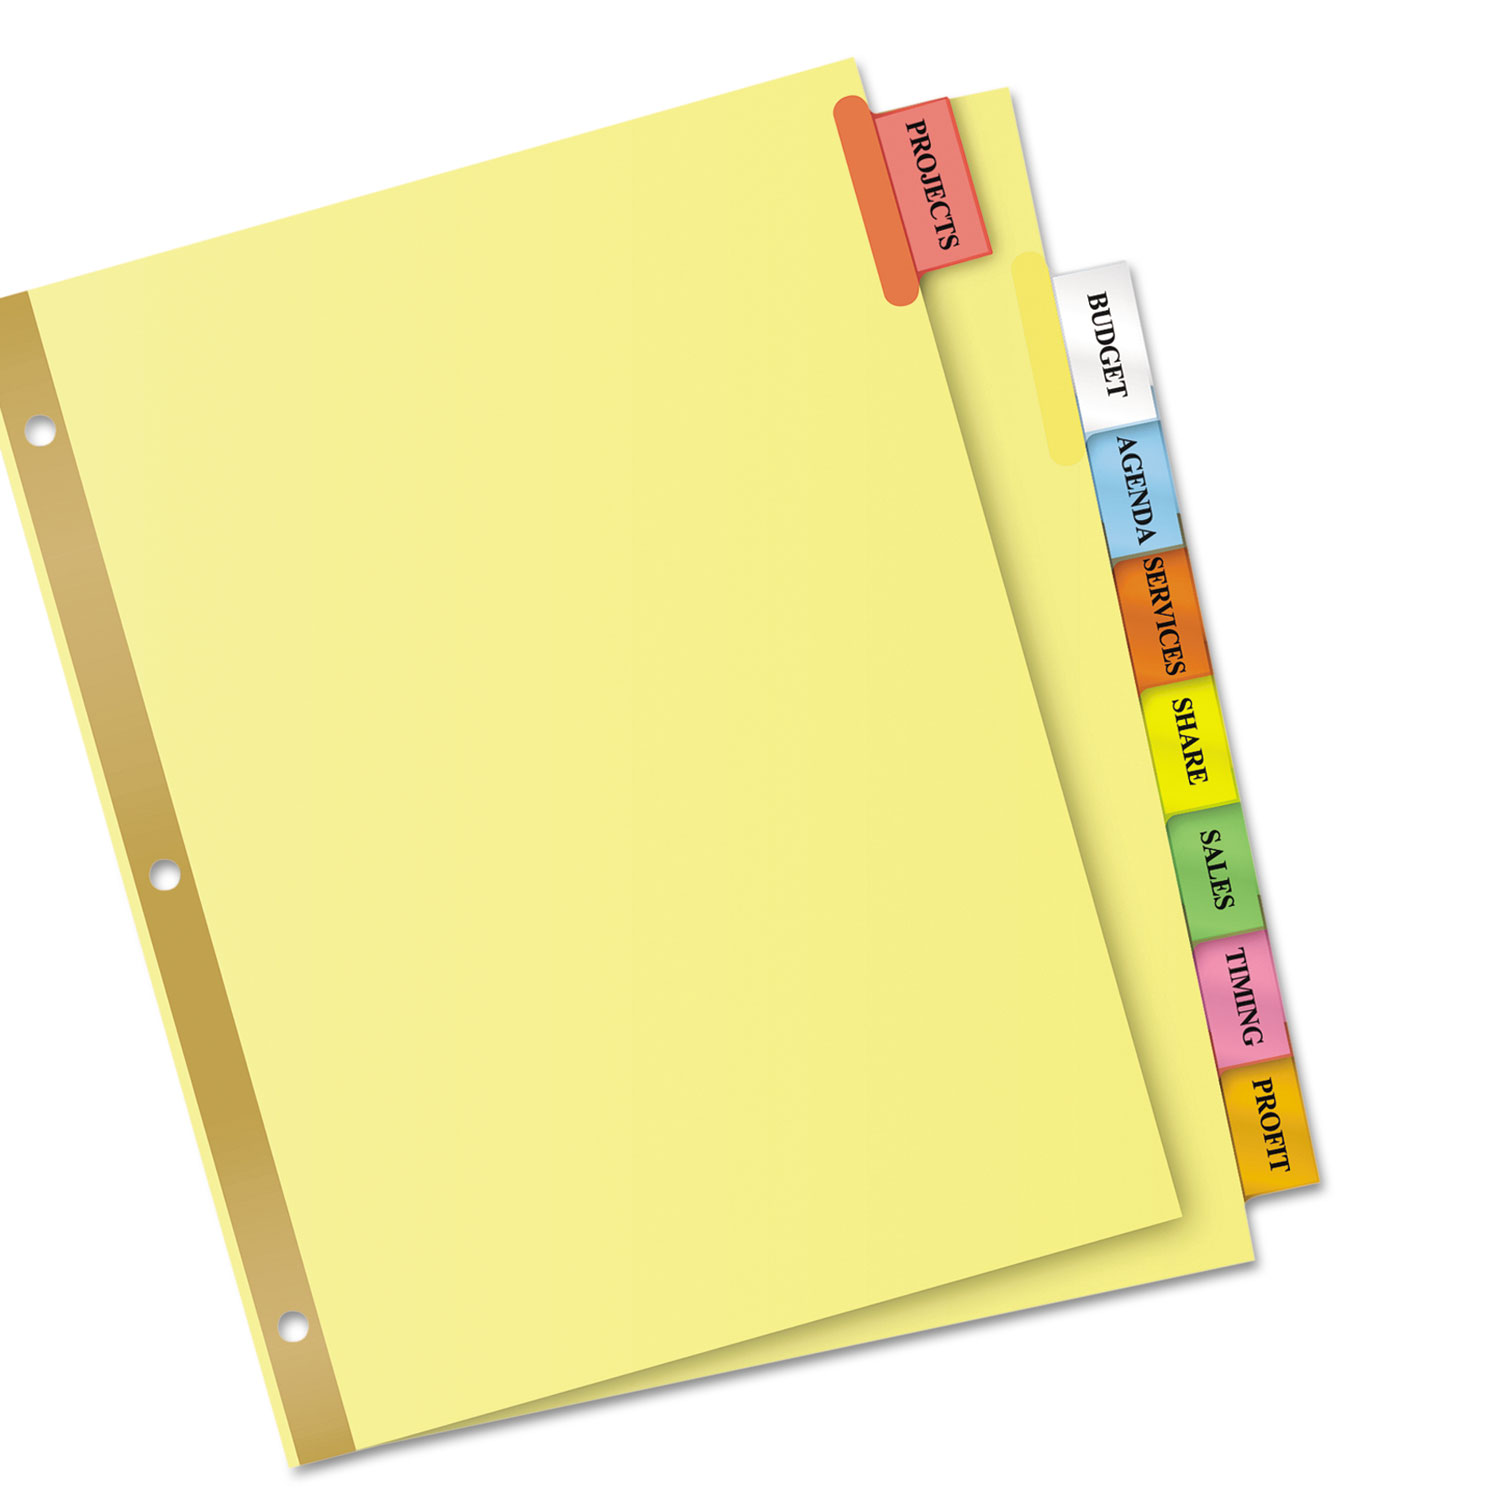 Insertable Big Tab Dividers, 8Tab, Letter RAM Discount Computer Supplies